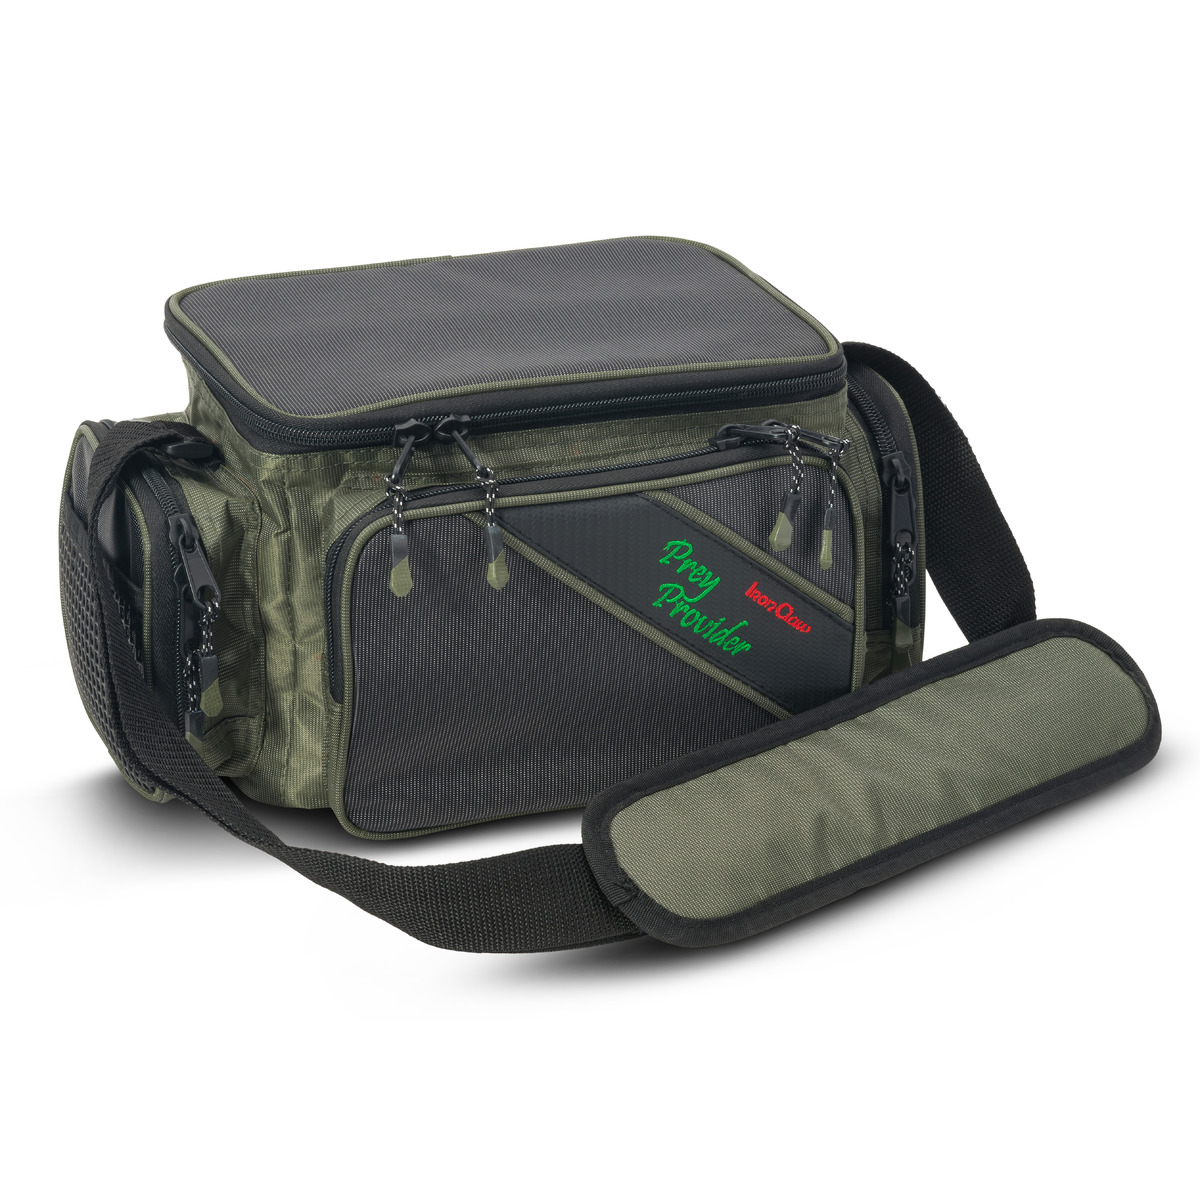 Iron Claw Prey Provider Cooler Bag - S